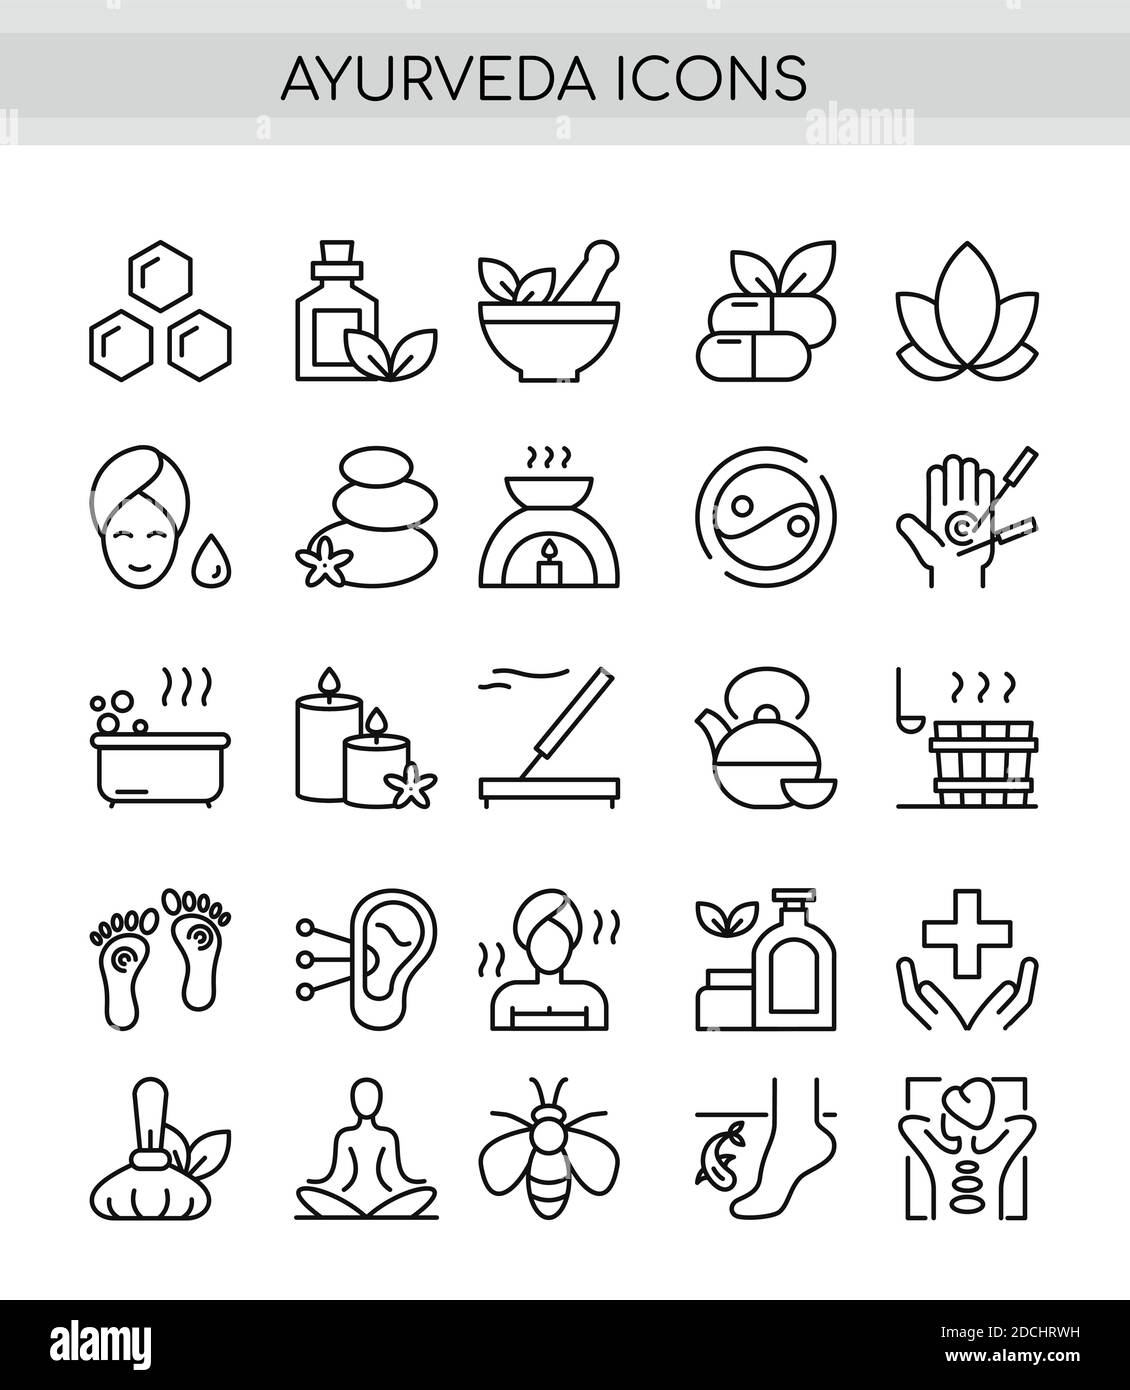 Ayurveda thin line icons set. Outline pictogram vector illustration, aroma therapy, ayurvedic collection with symbols of healthy alternative medicine, Stock Vector